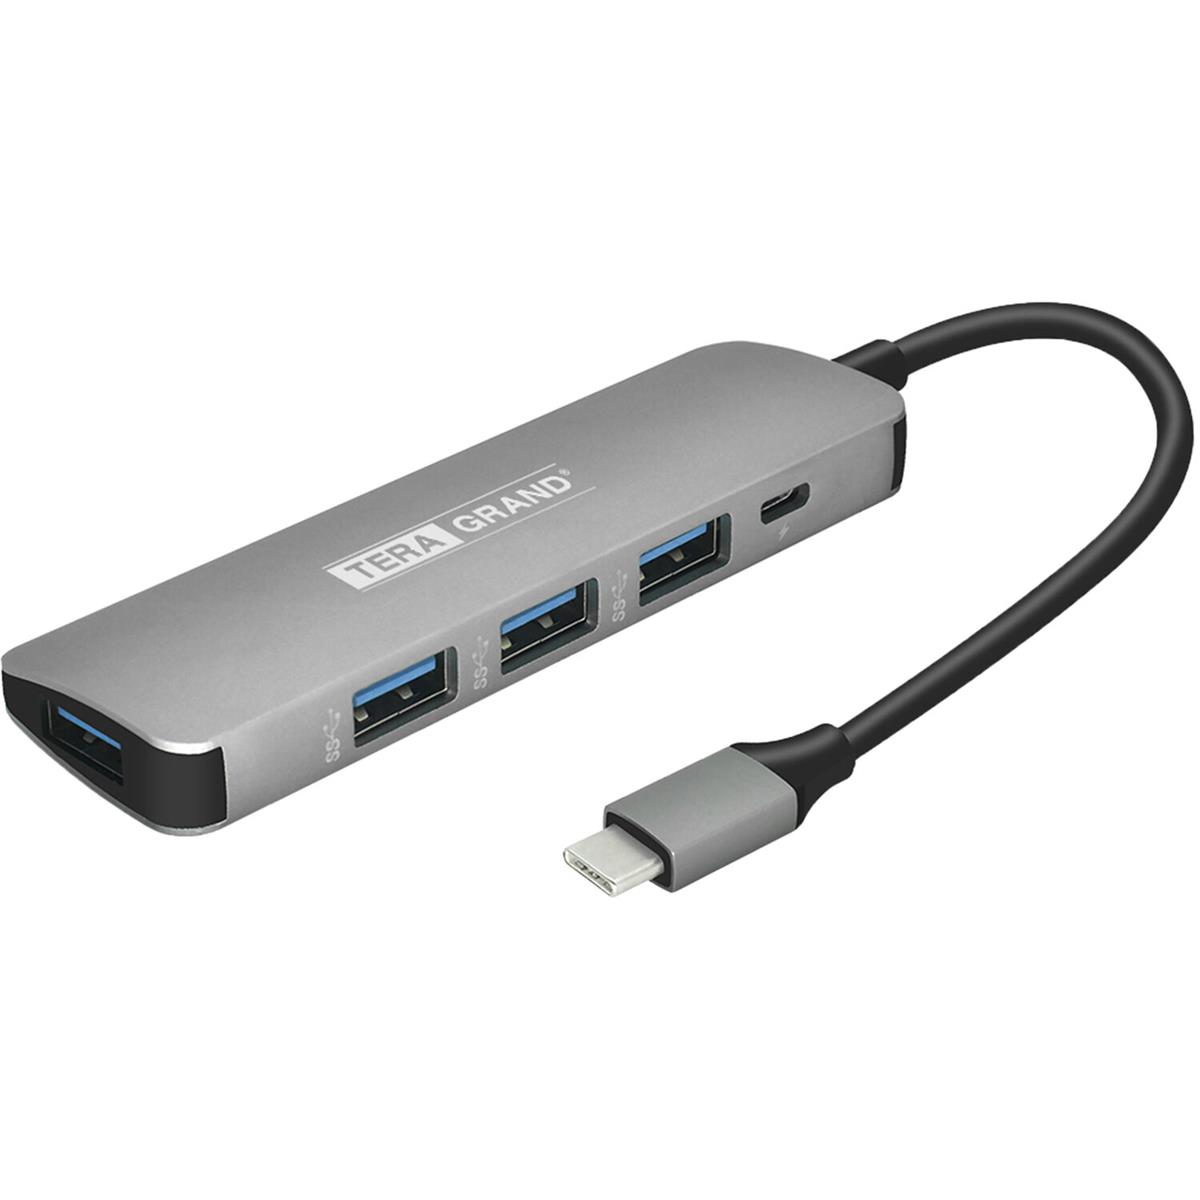 Image of Tera Grand 4-Port USB 3.1 Gen 1 Hub with Power Delivery Port